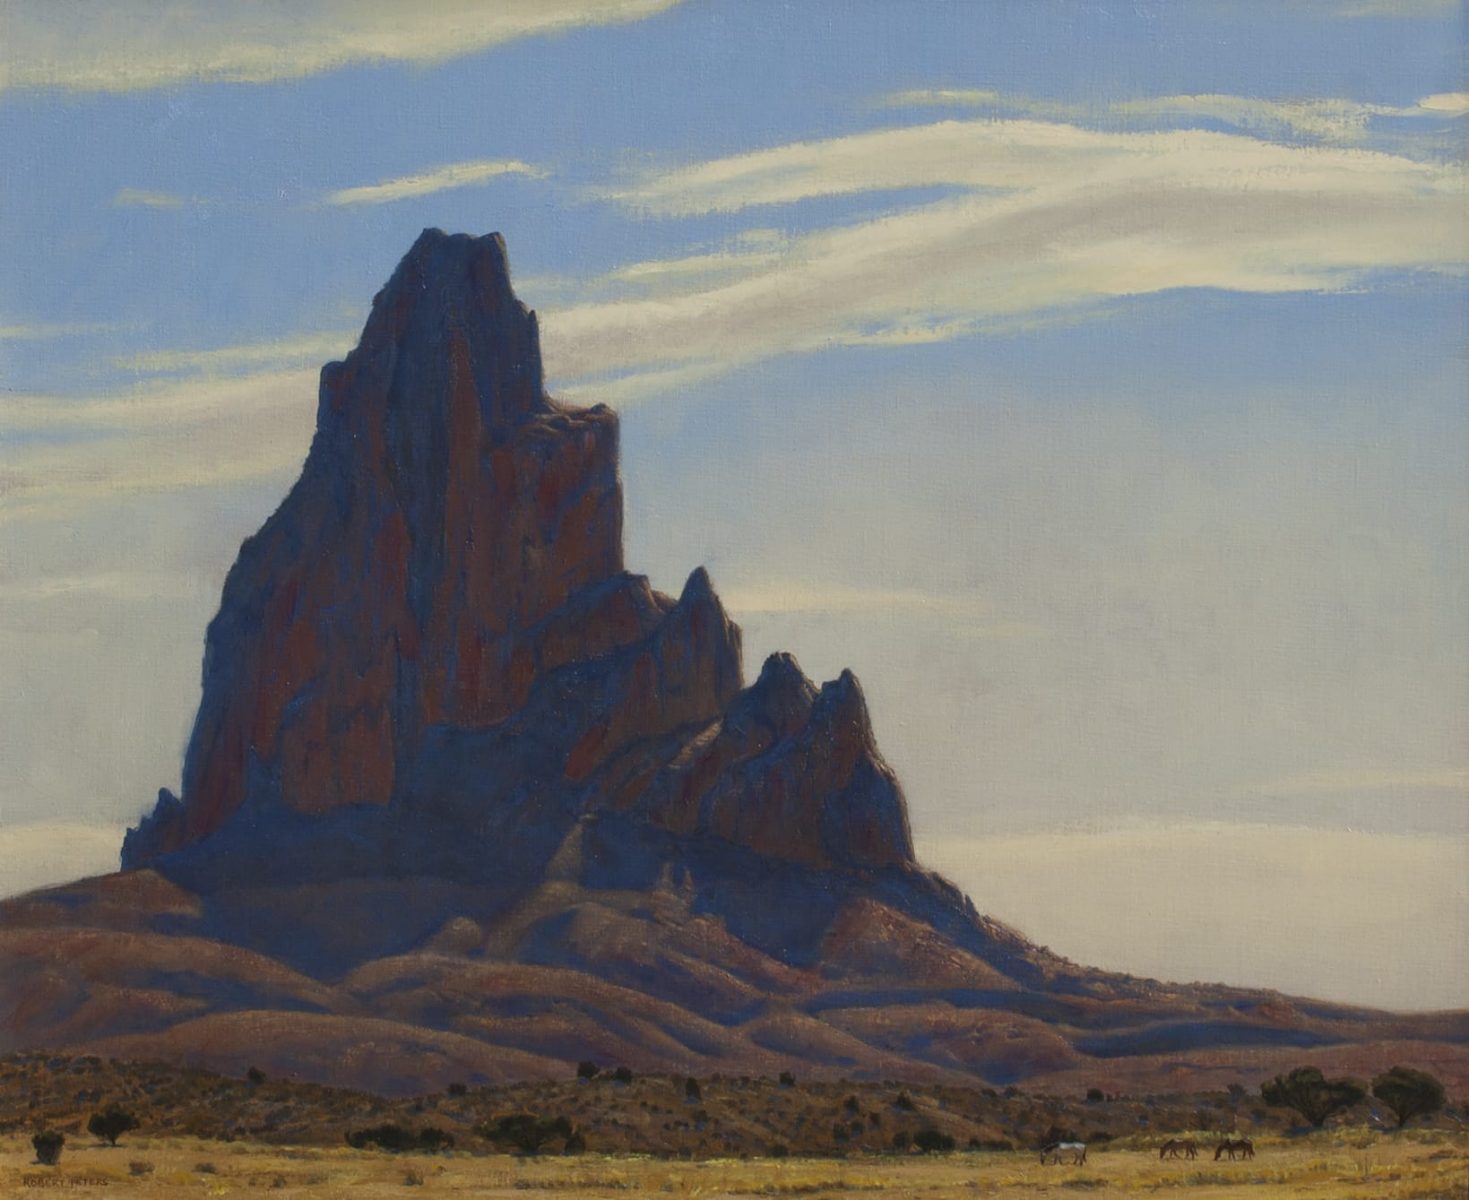 Timeless Giant, Monument Valley by artist Robert Peters